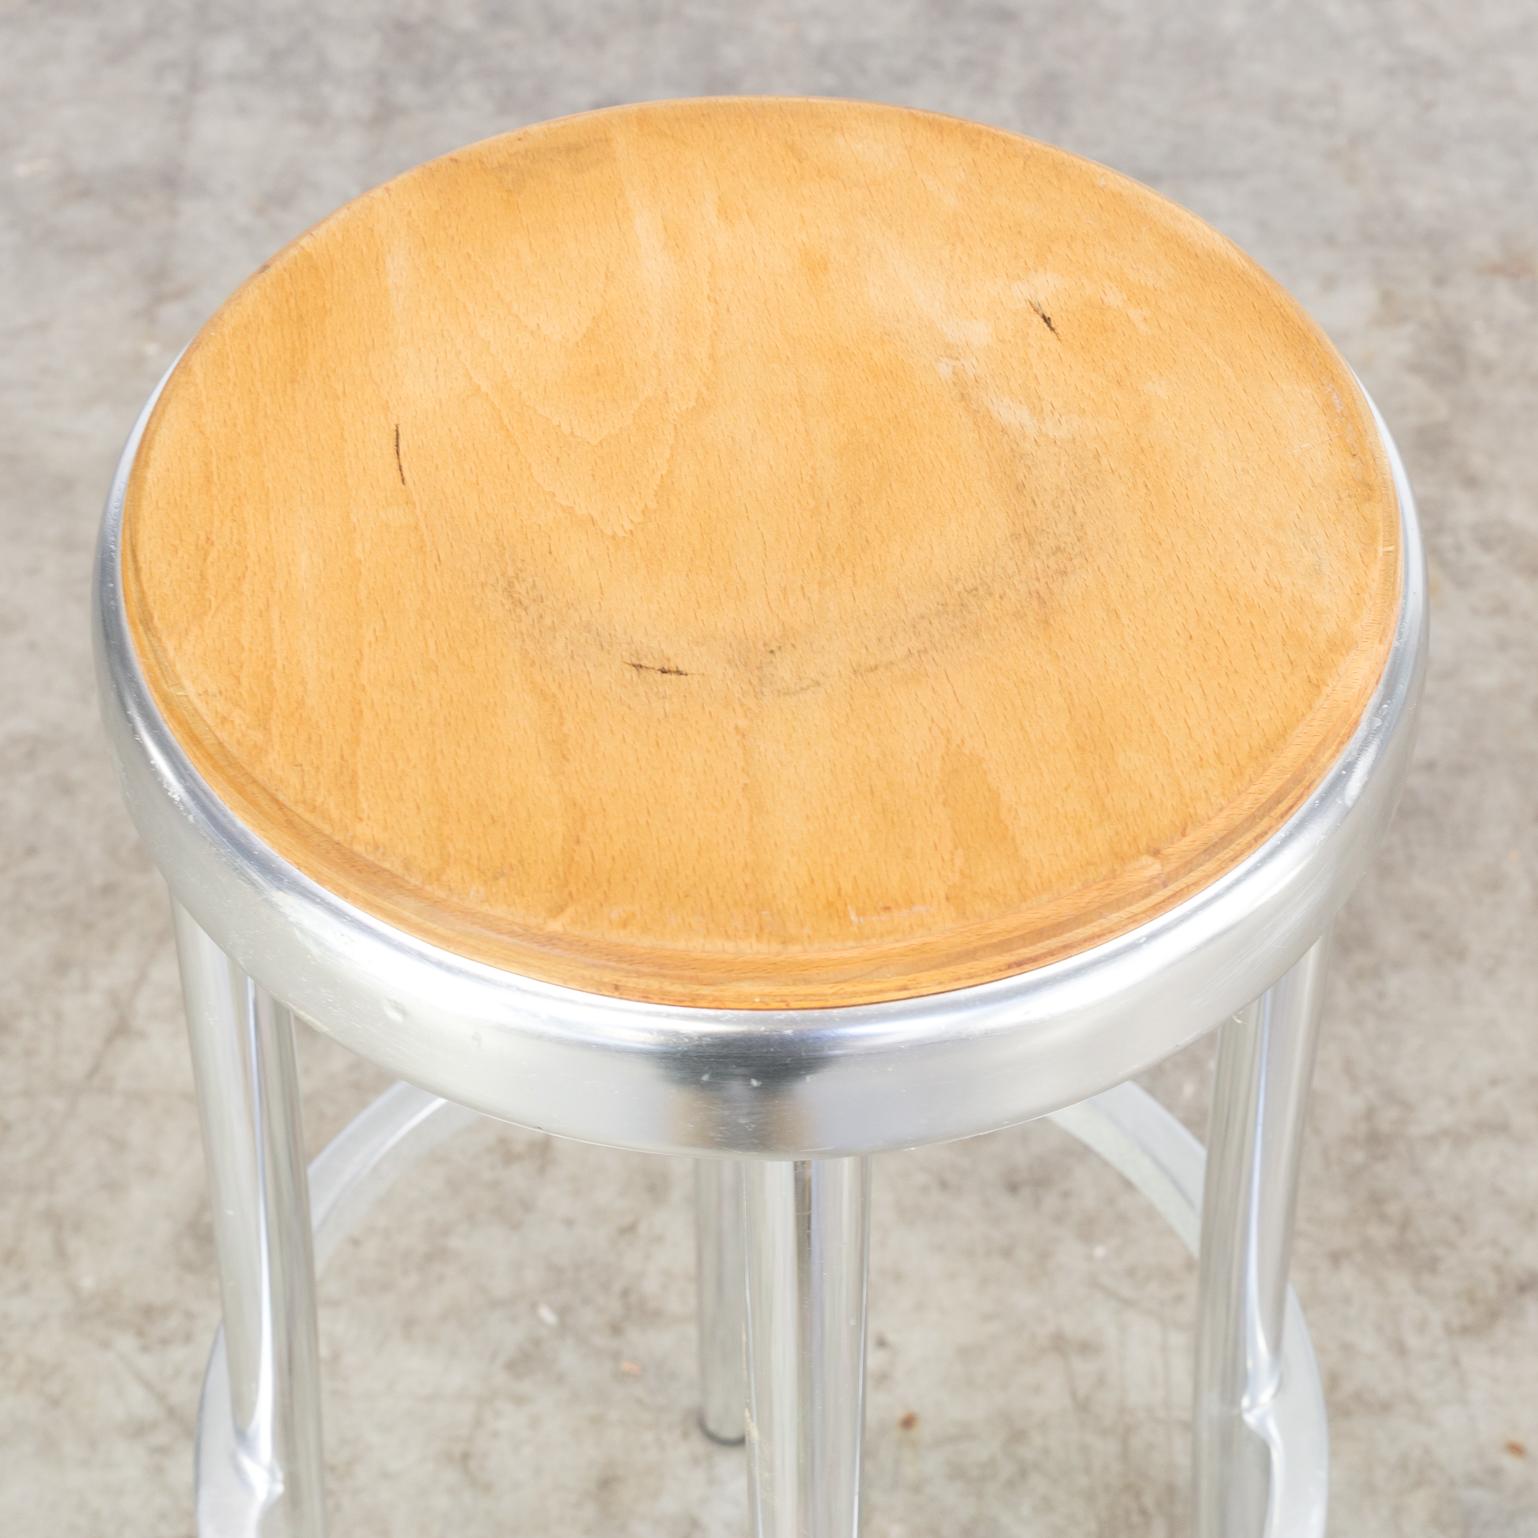 Midcentury Aluminium Framed Wooden Seated Stools Set of 2 For Sale 2